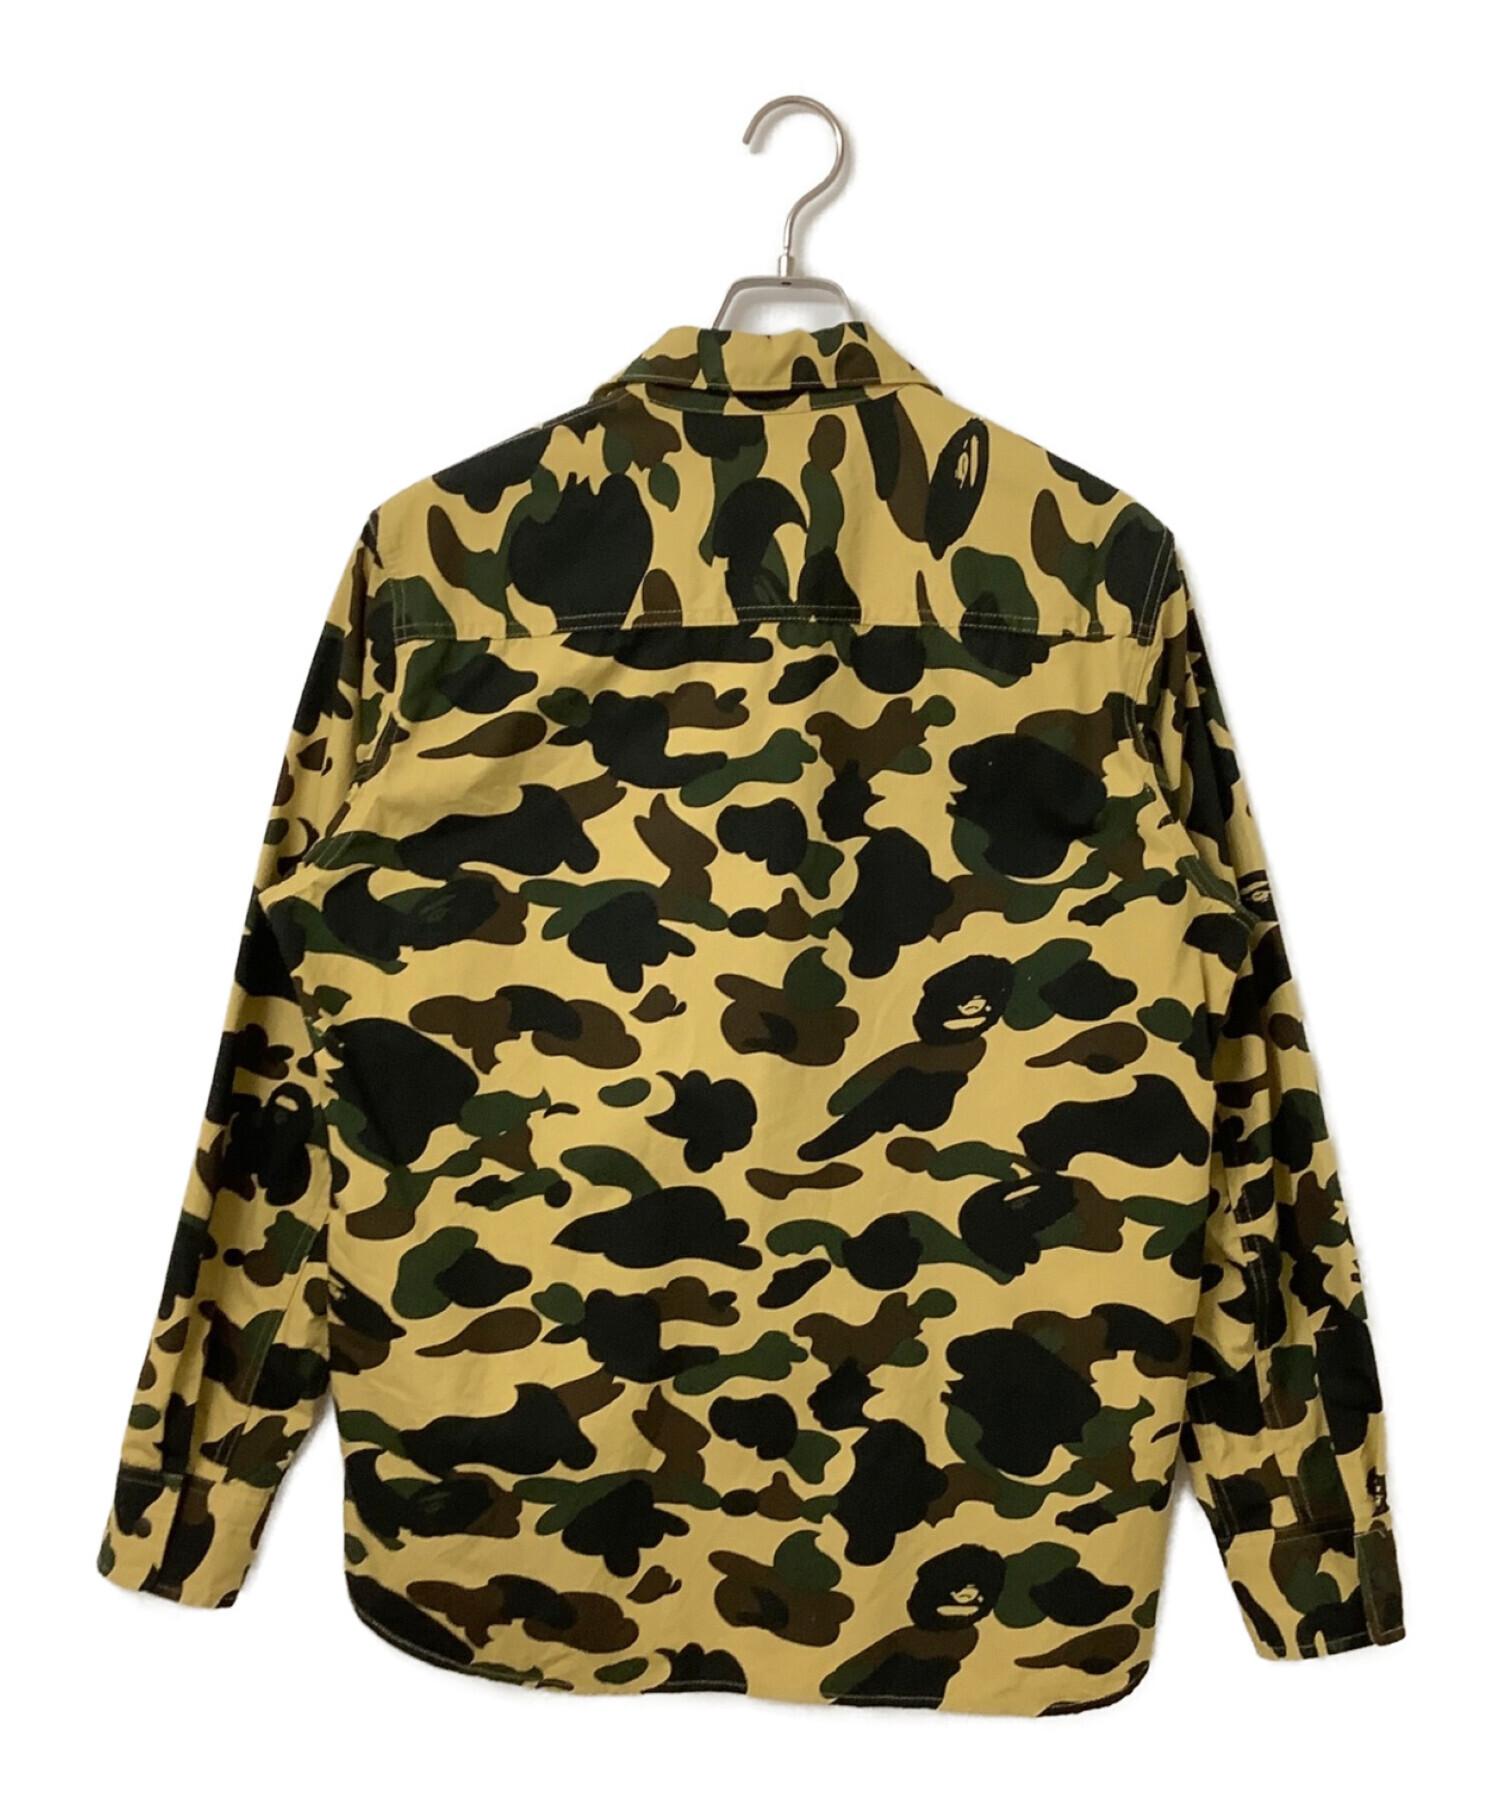 A BATHING APE (アベイシングエイプ) 1ST CAMO OUTDOOR DETAIL POCKET RELAXED FIT SHIRT  カーキ サイズ:S